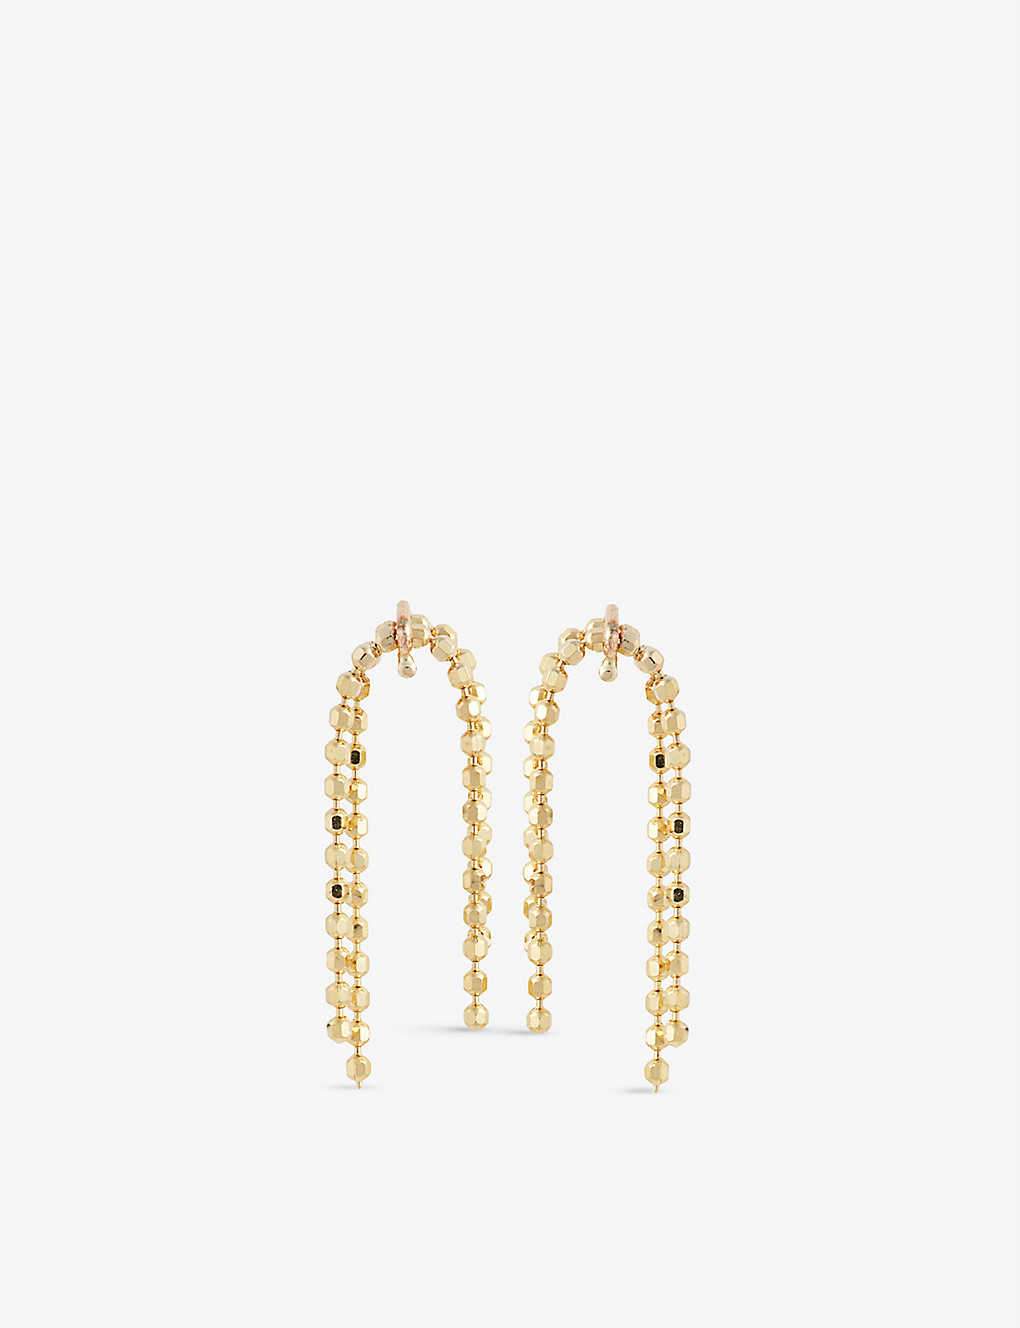 The Alkemistry Poppy Finch 14ct Yellow-gold Petite Double Crescent Earrings In 14ct Yellow Gold